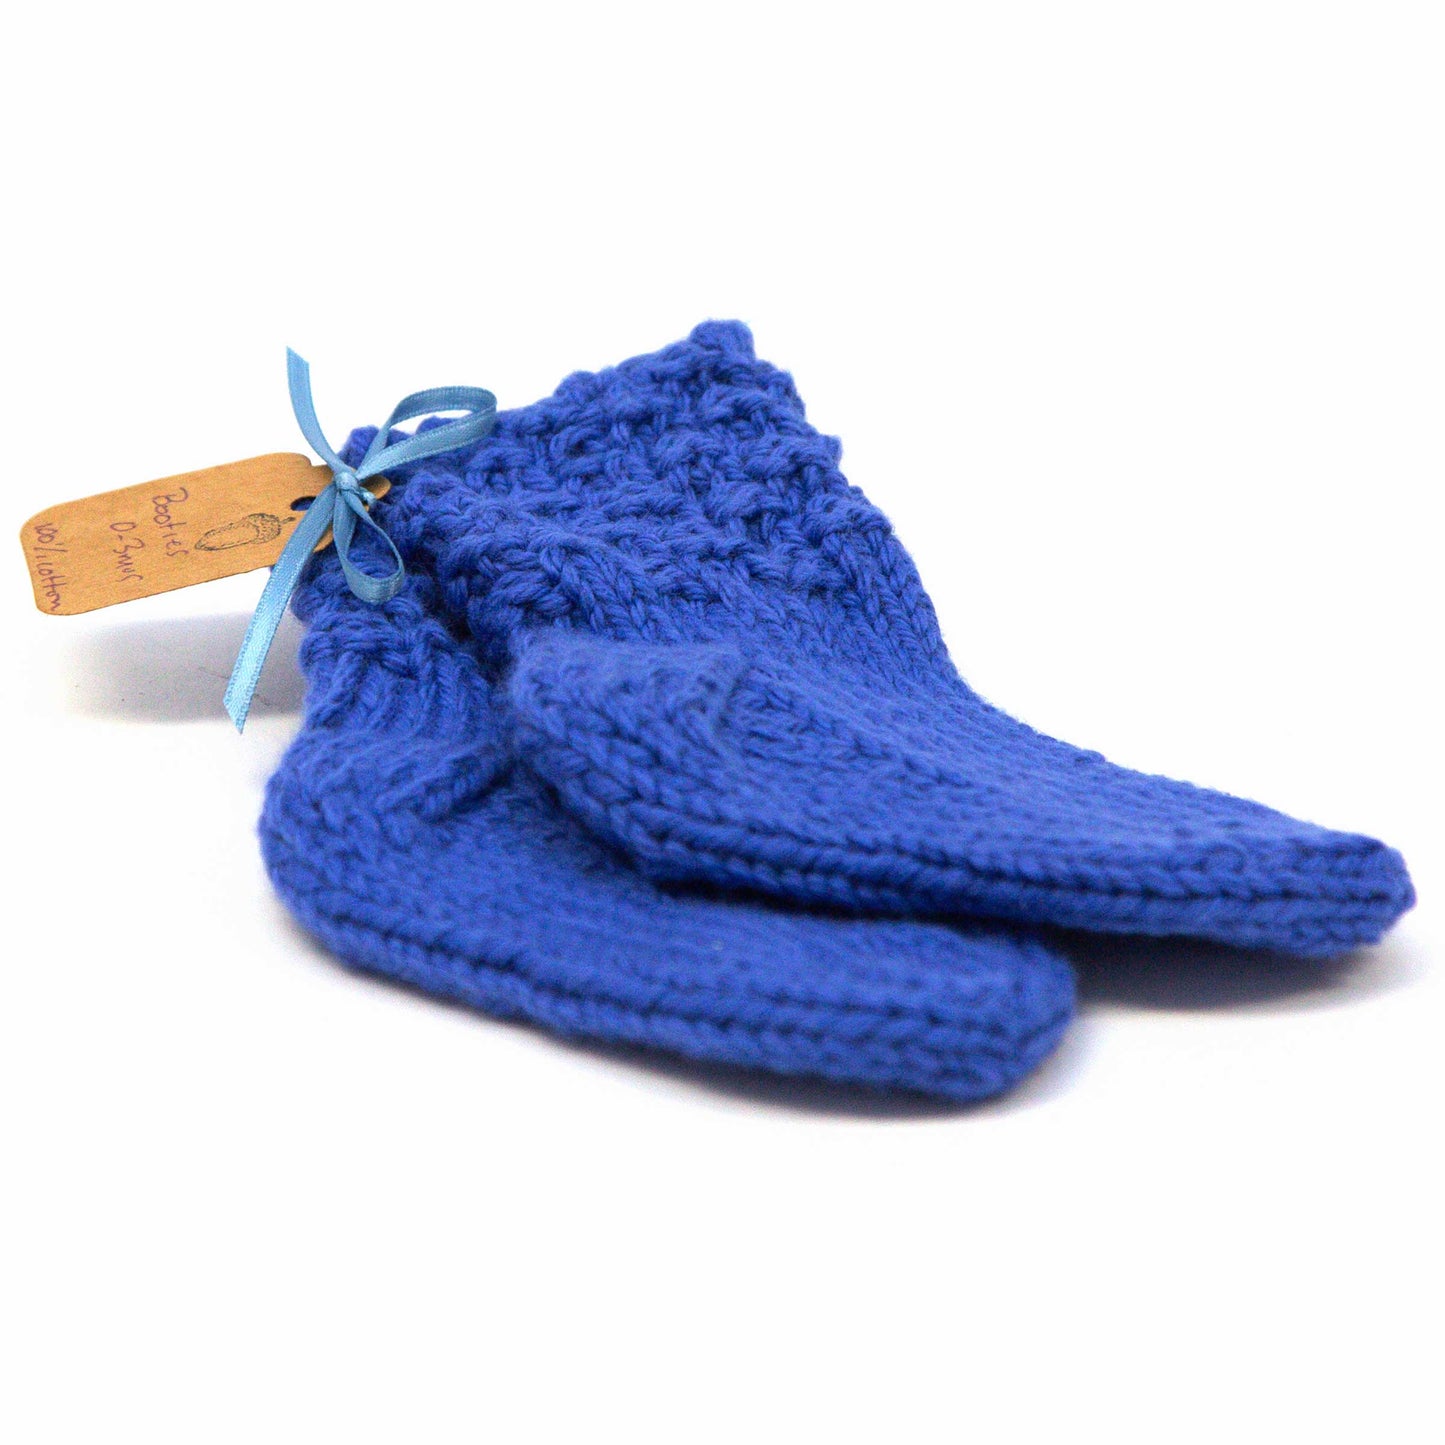 Baby Booties, 0-3 months, Hand Knit, Cotton, No Seam, Washable, Royal Blue